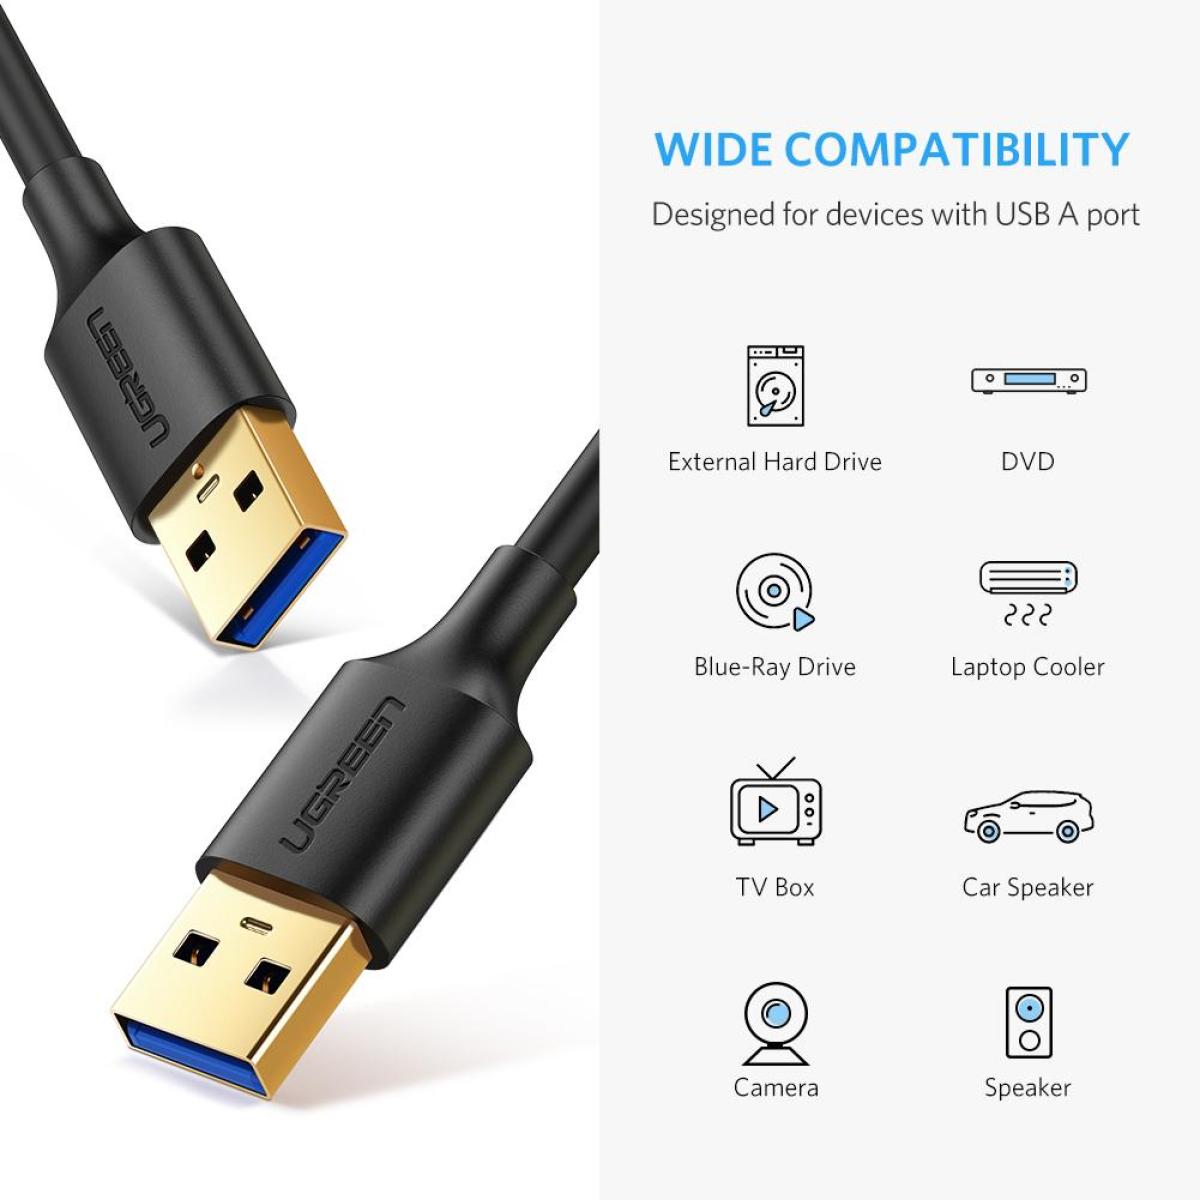 UGREEN USB 3.0 Male to Male Cable - 1M